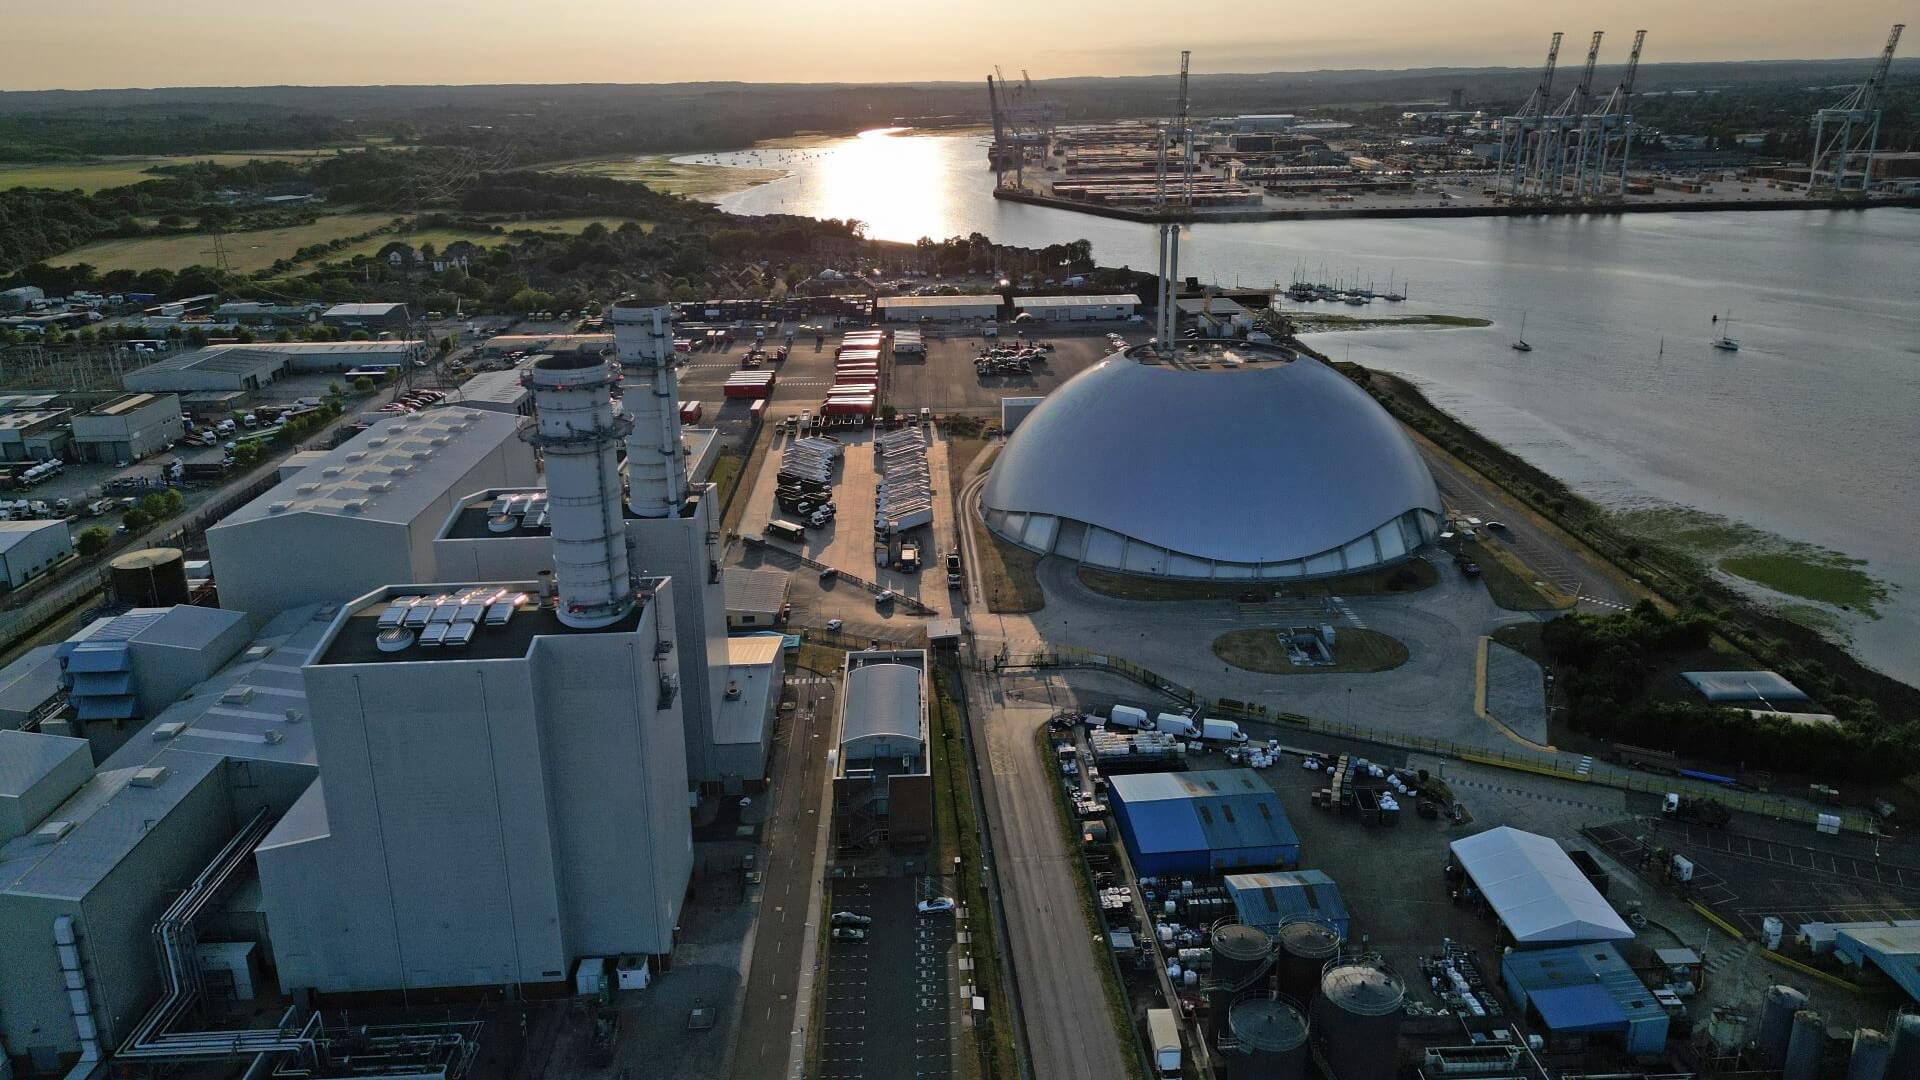 Aerial view over gas-fired power station facilities at sunset, with container terminal on horizon